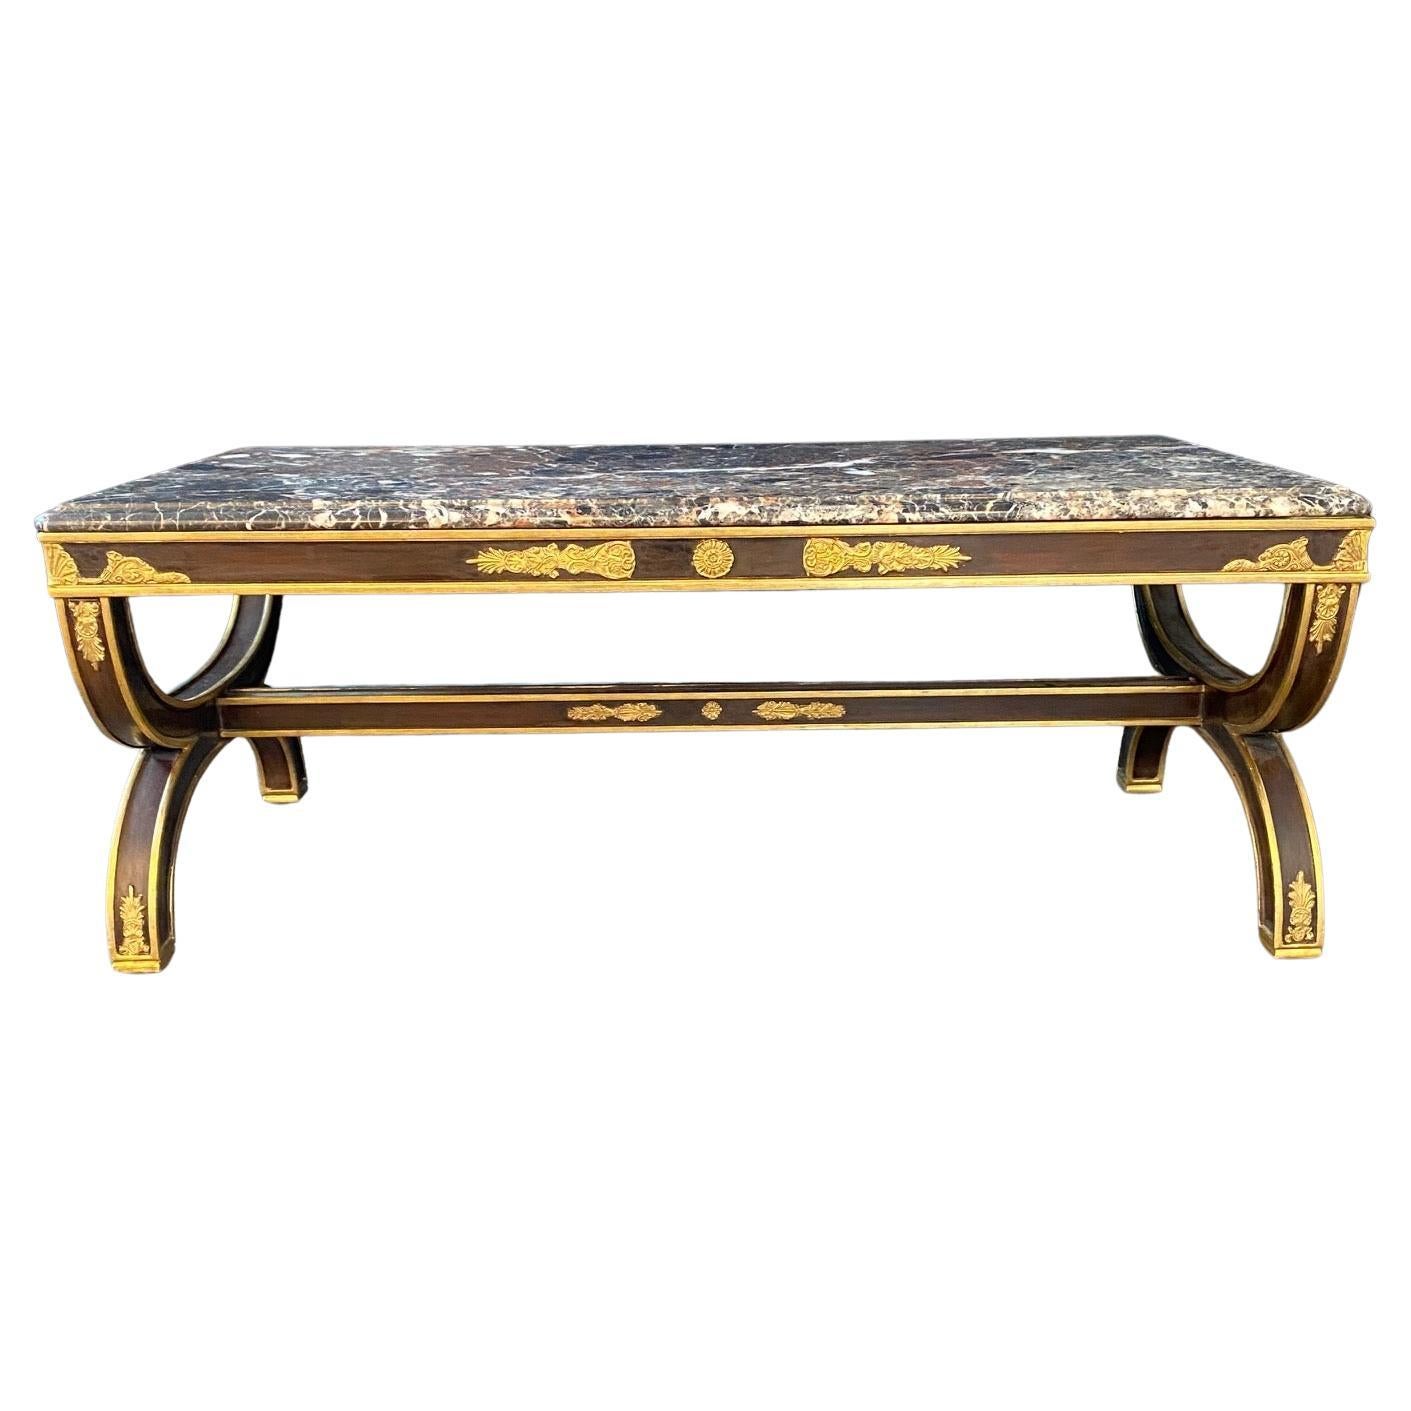 Elegant French Antique Neoclassical Ebony and Gold Gilt Marble Top Coffee Table 